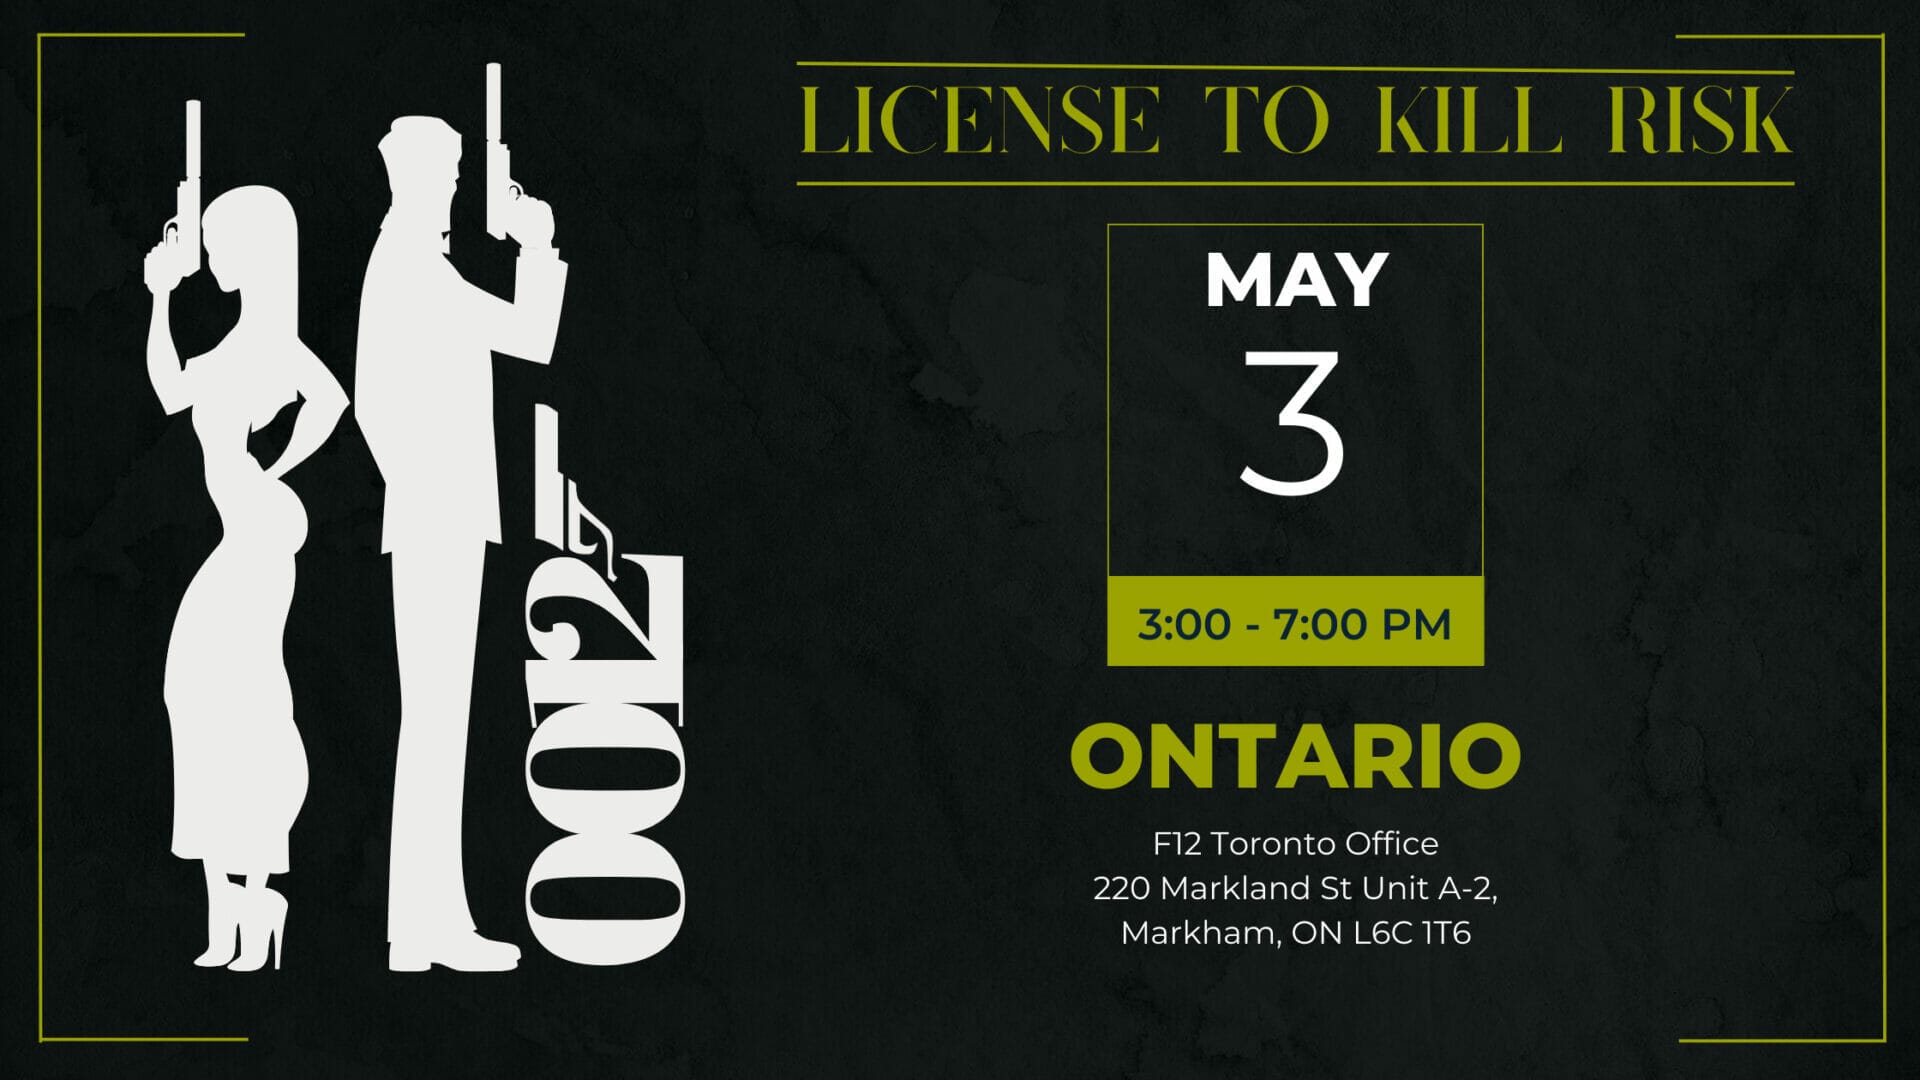 Banner of Toronto Cybersecurity Event: License to Kill Risk with date and time - May 3rd, 3:00-7:00pm Eastern Time, at the F12 Toronto Office